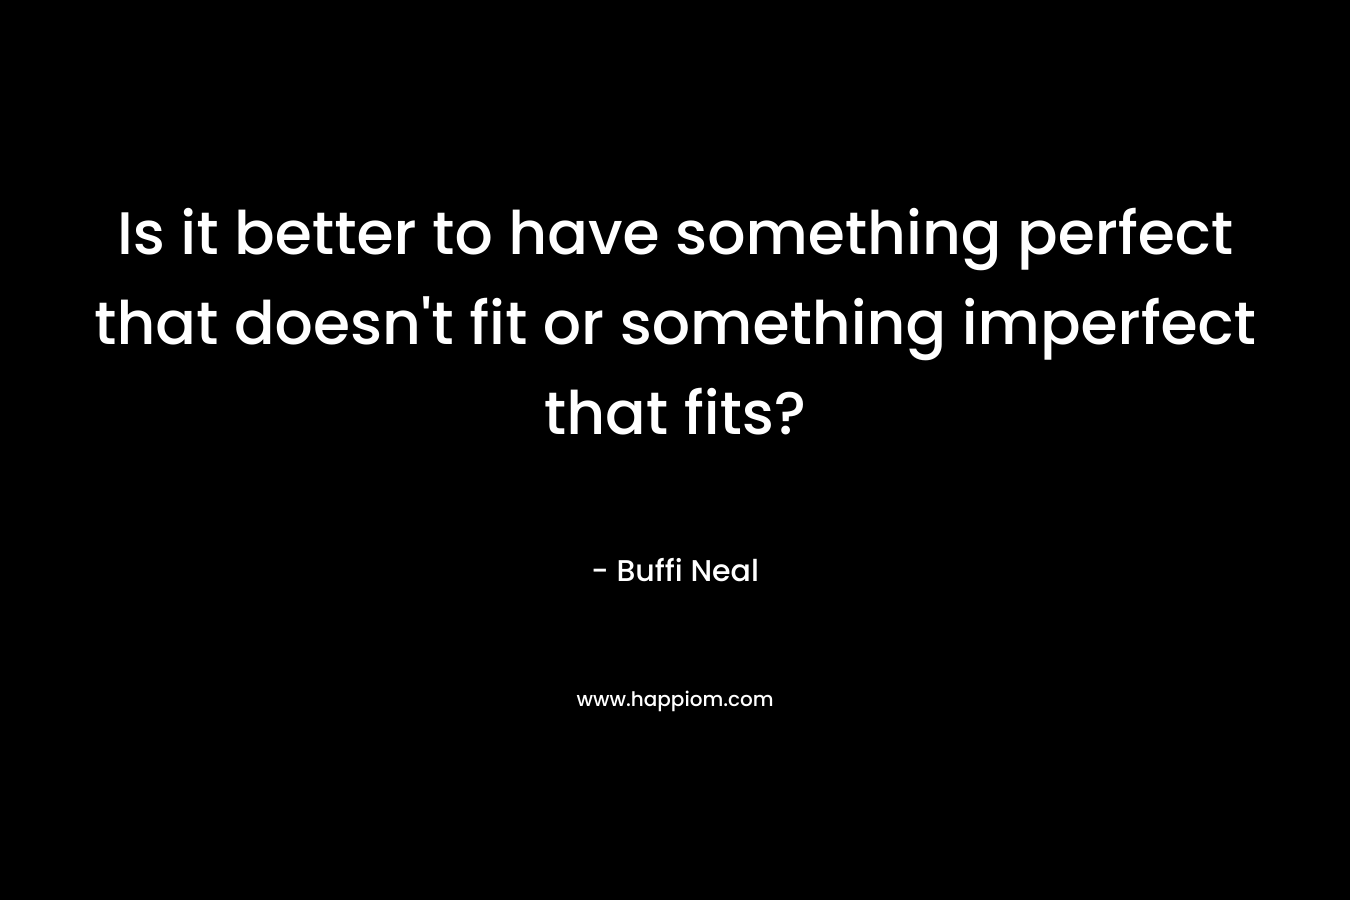 Is it better to have something perfect that doesn’t fit or something imperfect that fits? – Buffi Neal